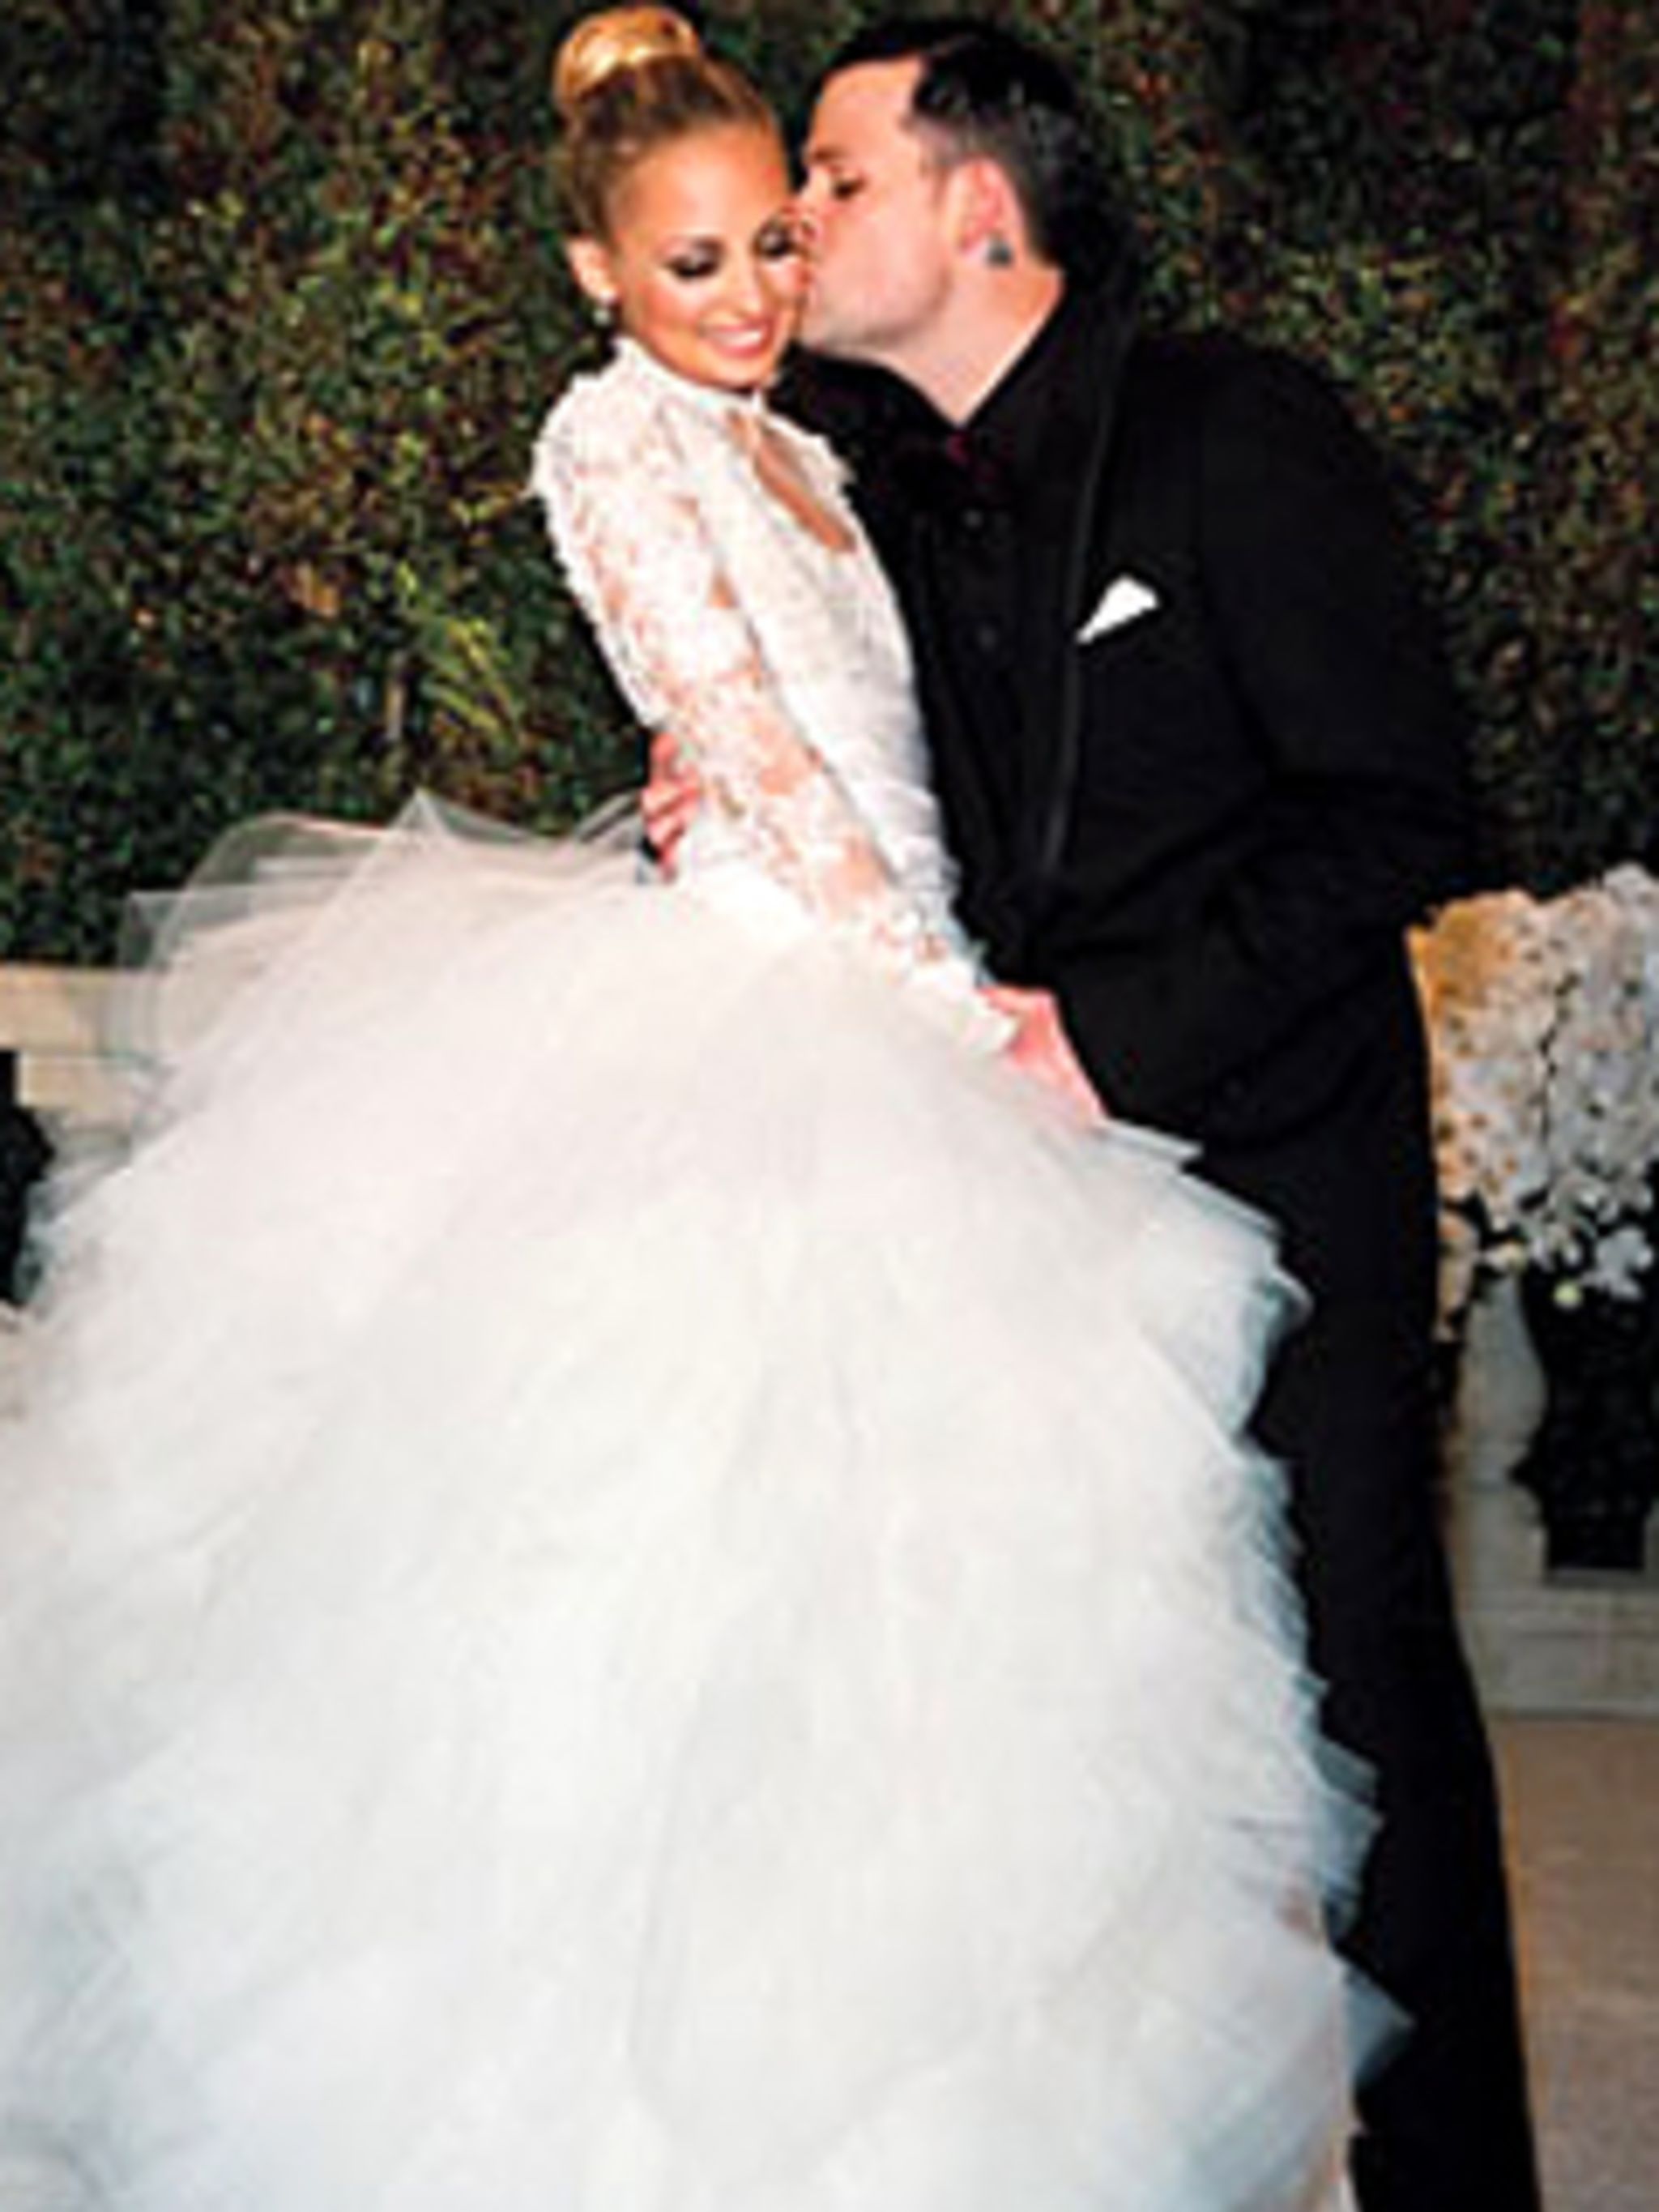 Nicole Richie's candy floss bridal gown revealed